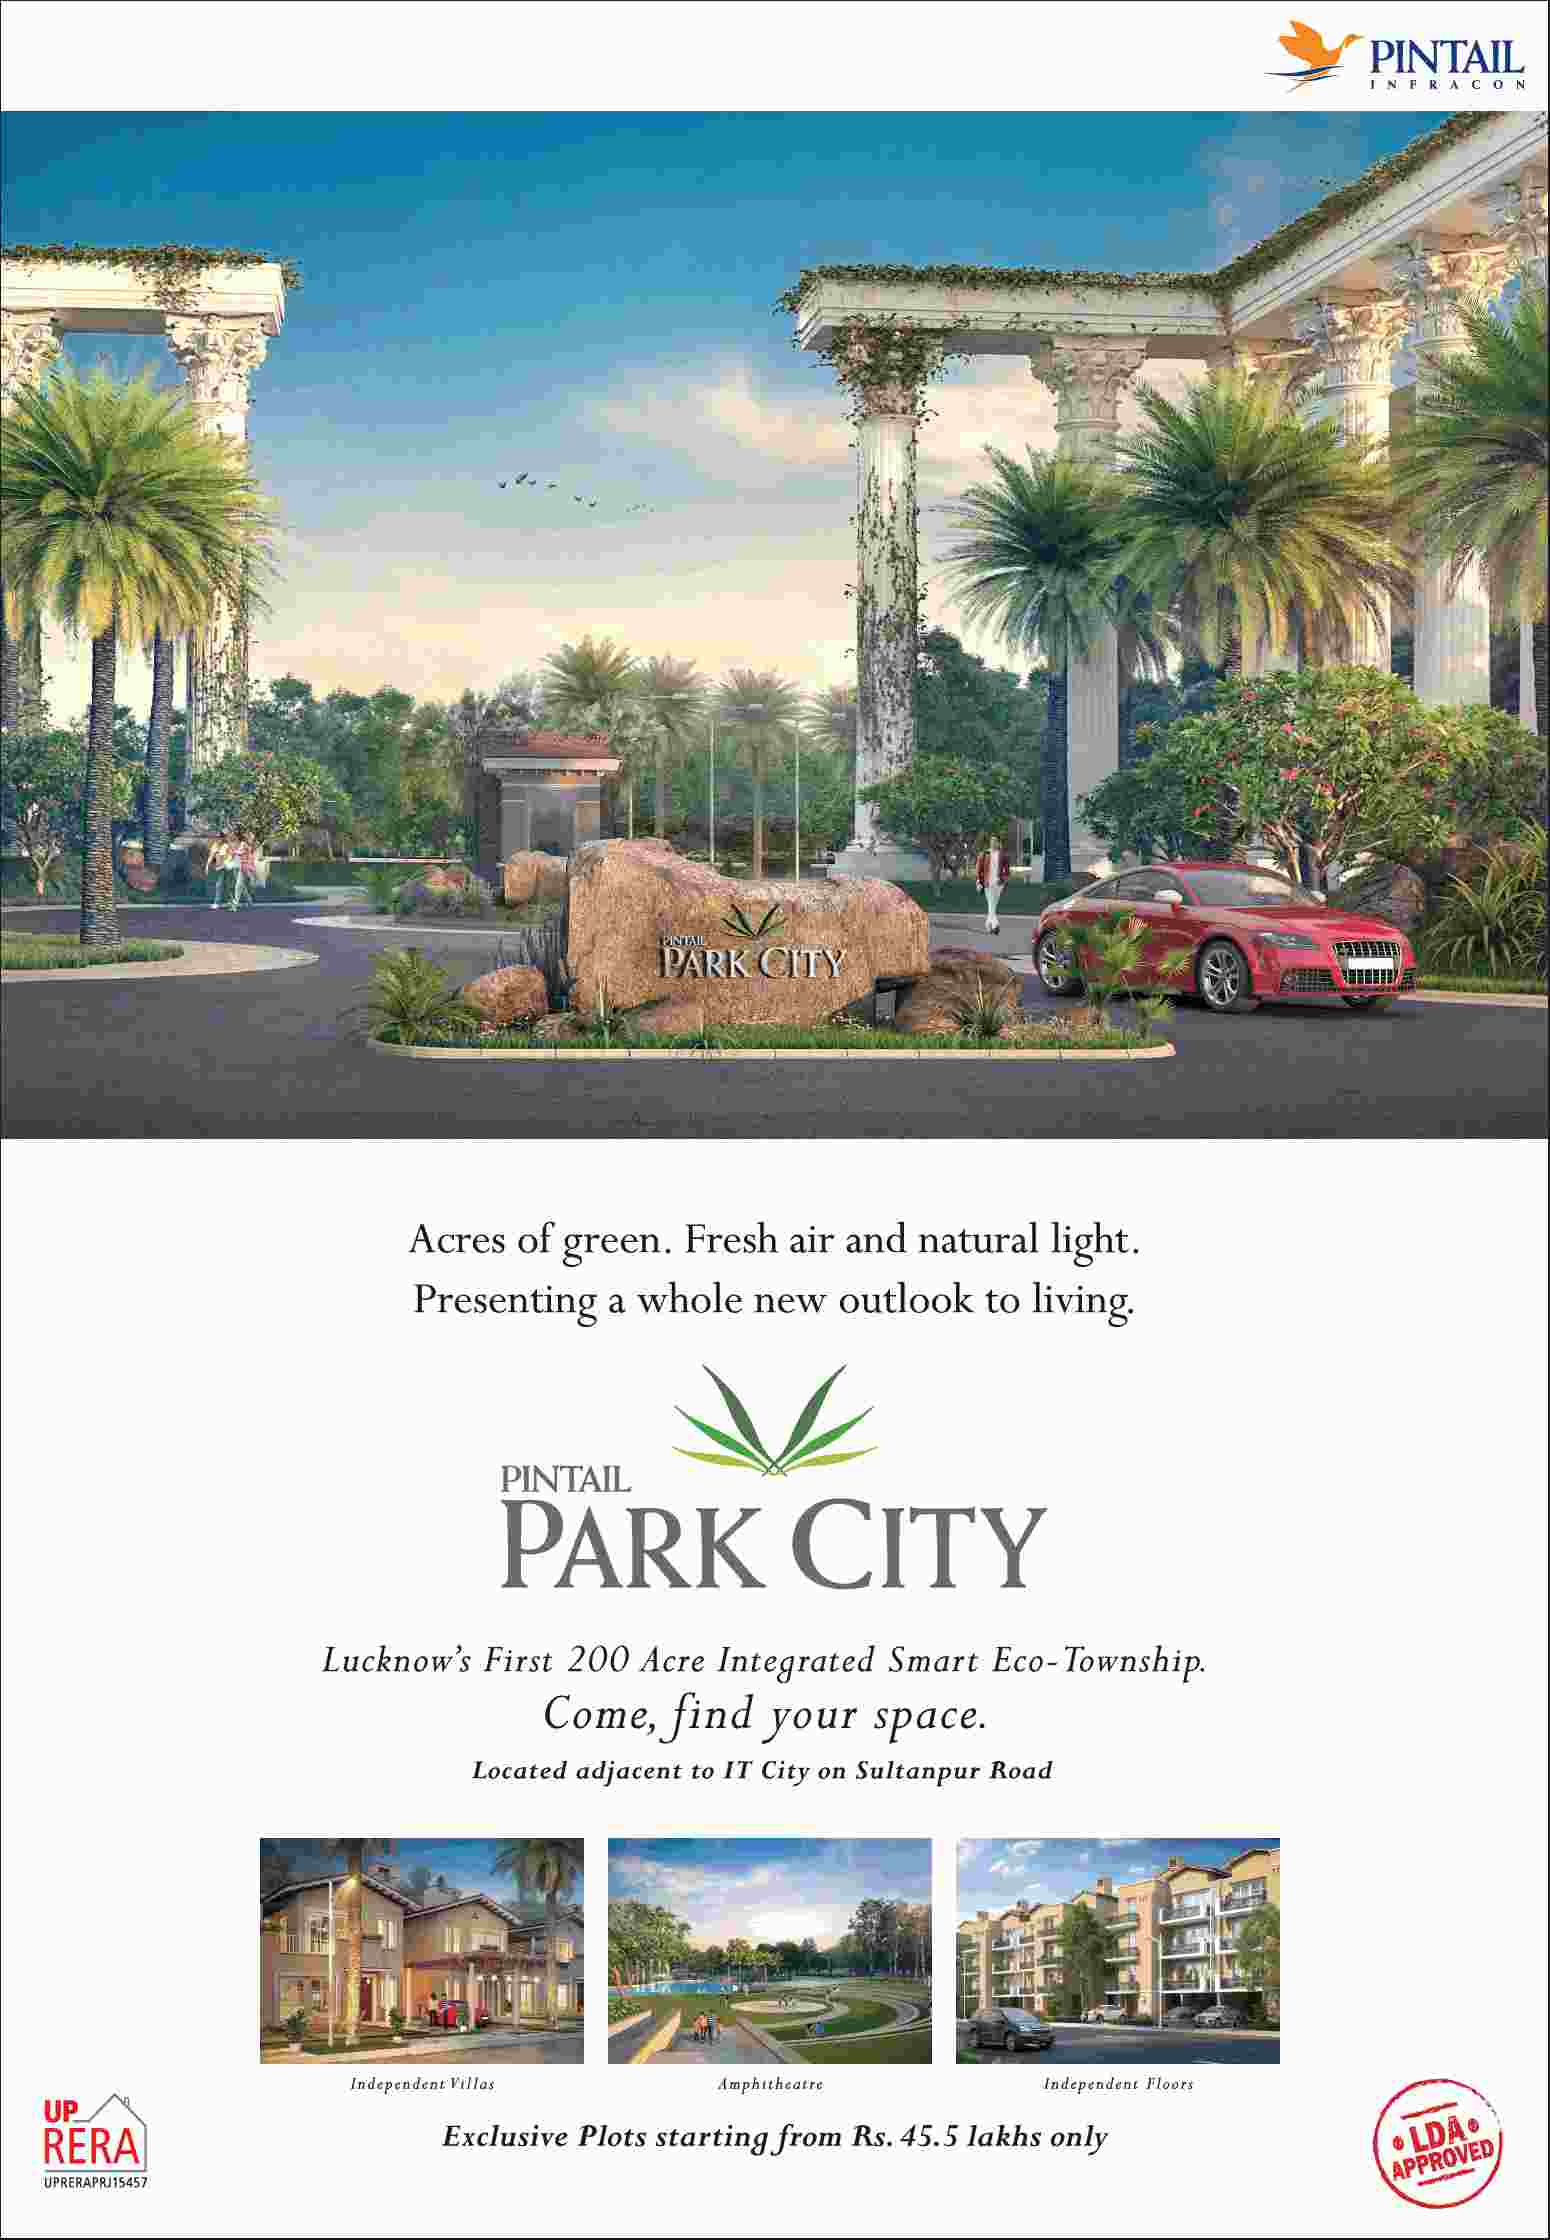 Book exclusive plots starting from Rs. 45.5 Lacs at Pintail Park City in Lucknow